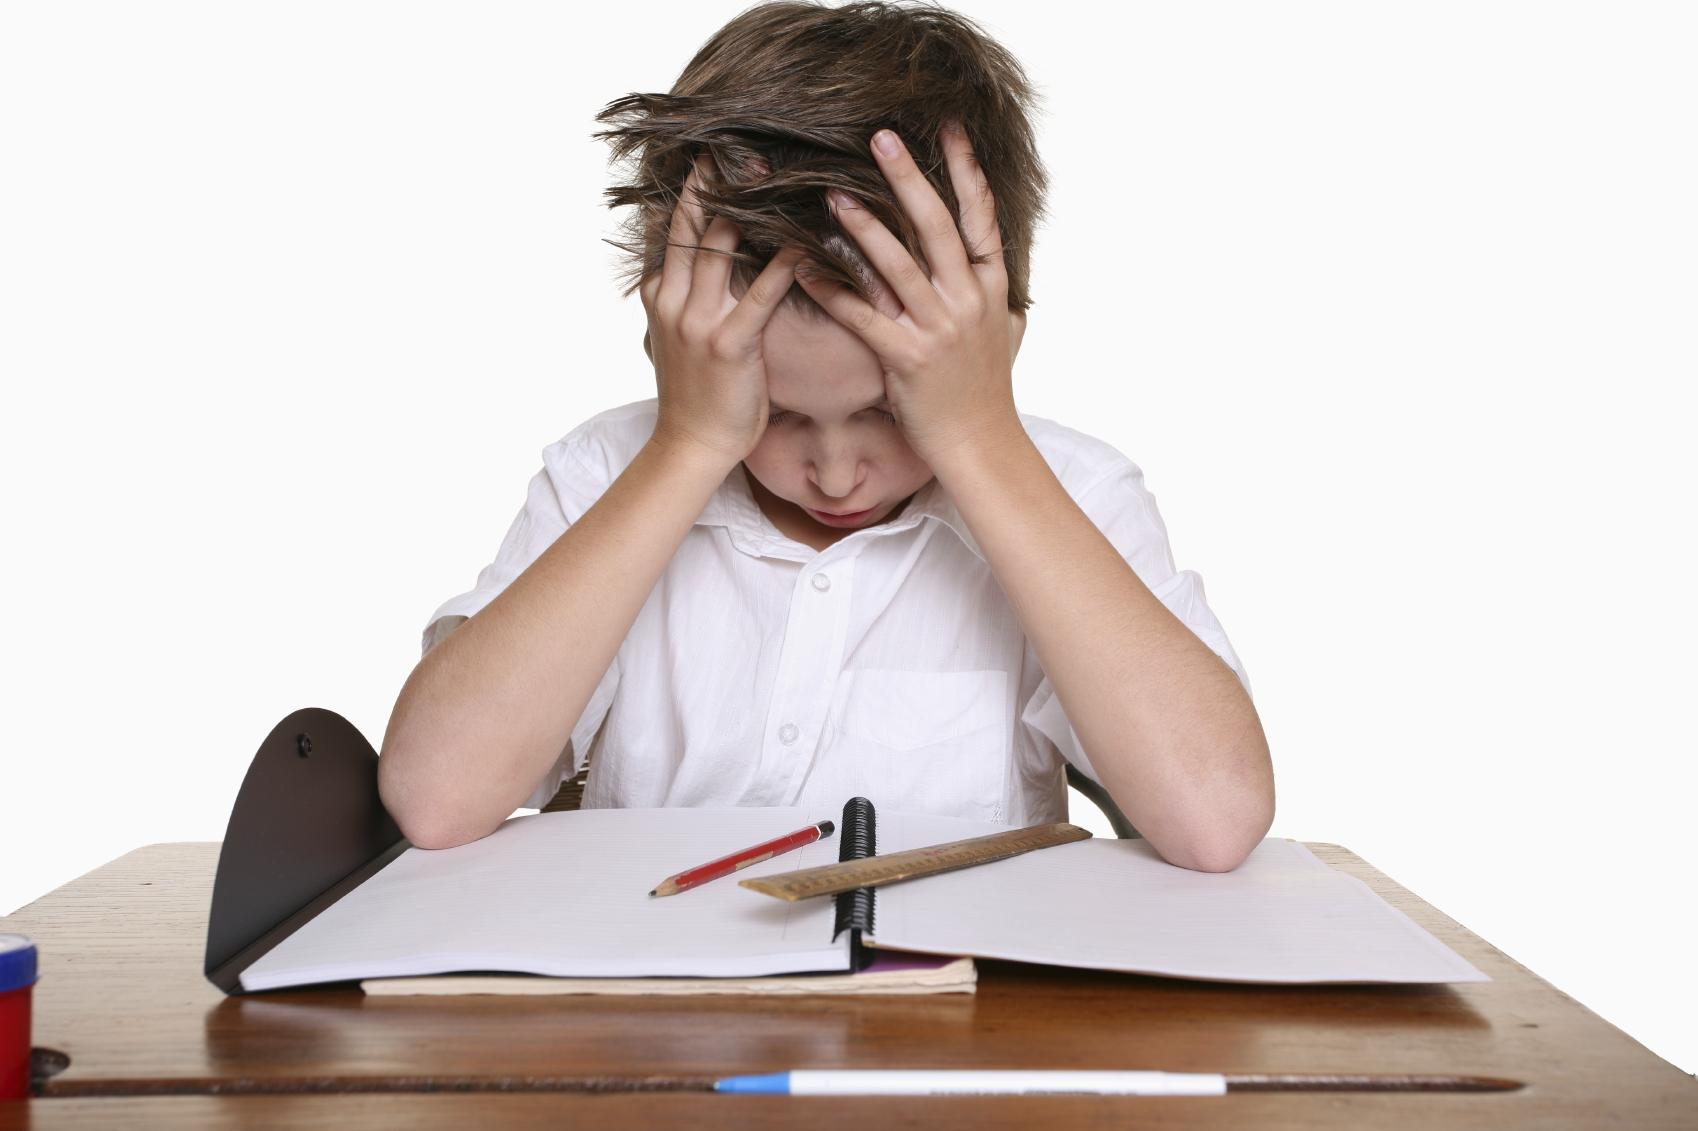 homework is harmful for students